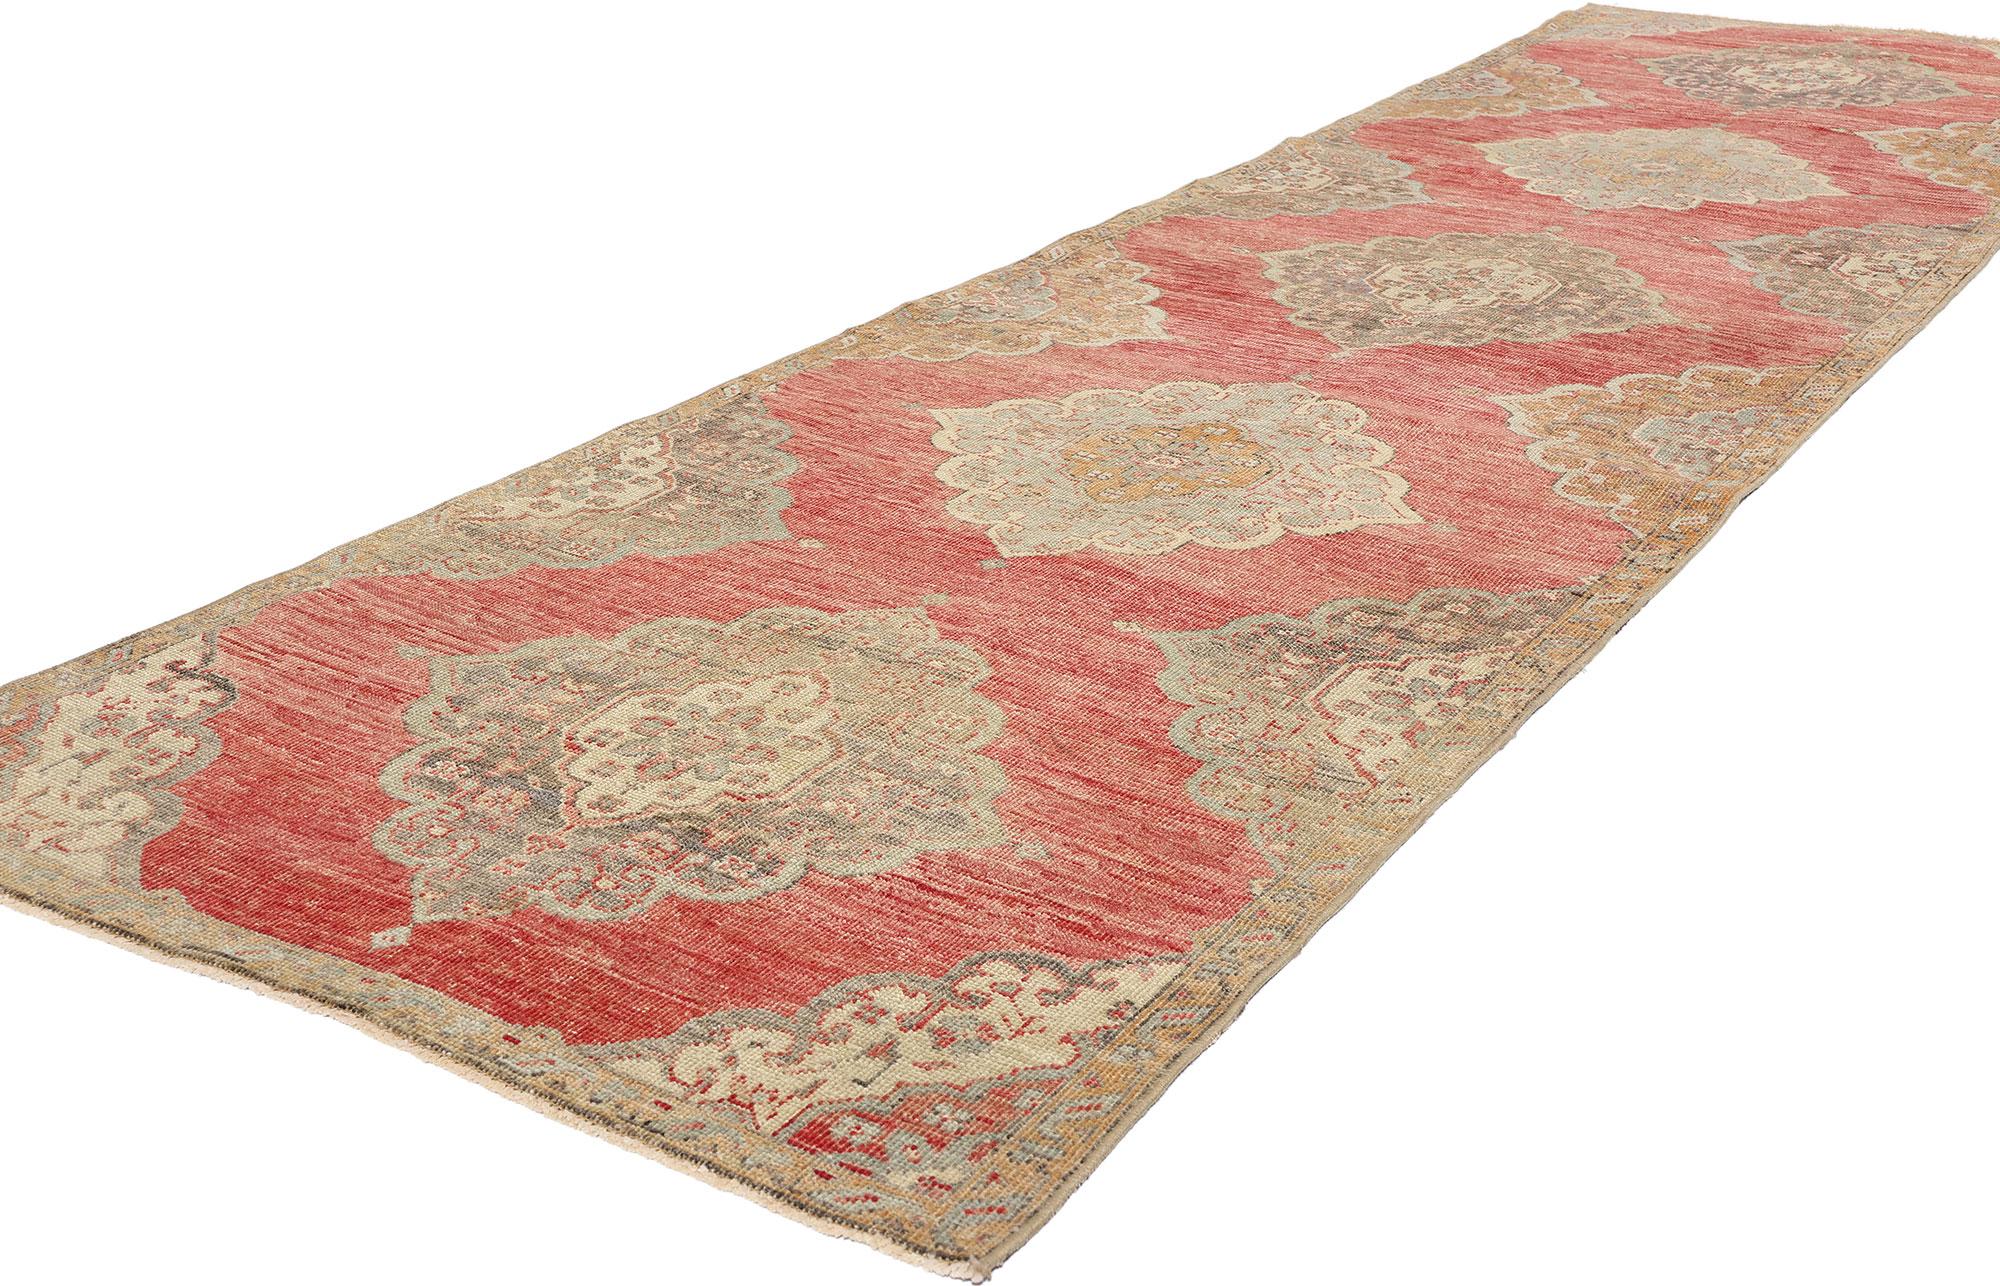 53913 Vintage Red Turkish Oushak Rug, 03'03 x 12'01. Please note this listing is for one piece. There is a matching piece available adds to its rarity. Turkish Oushak carpet runners, originating from the Oushak region in western Turkey, are renowned